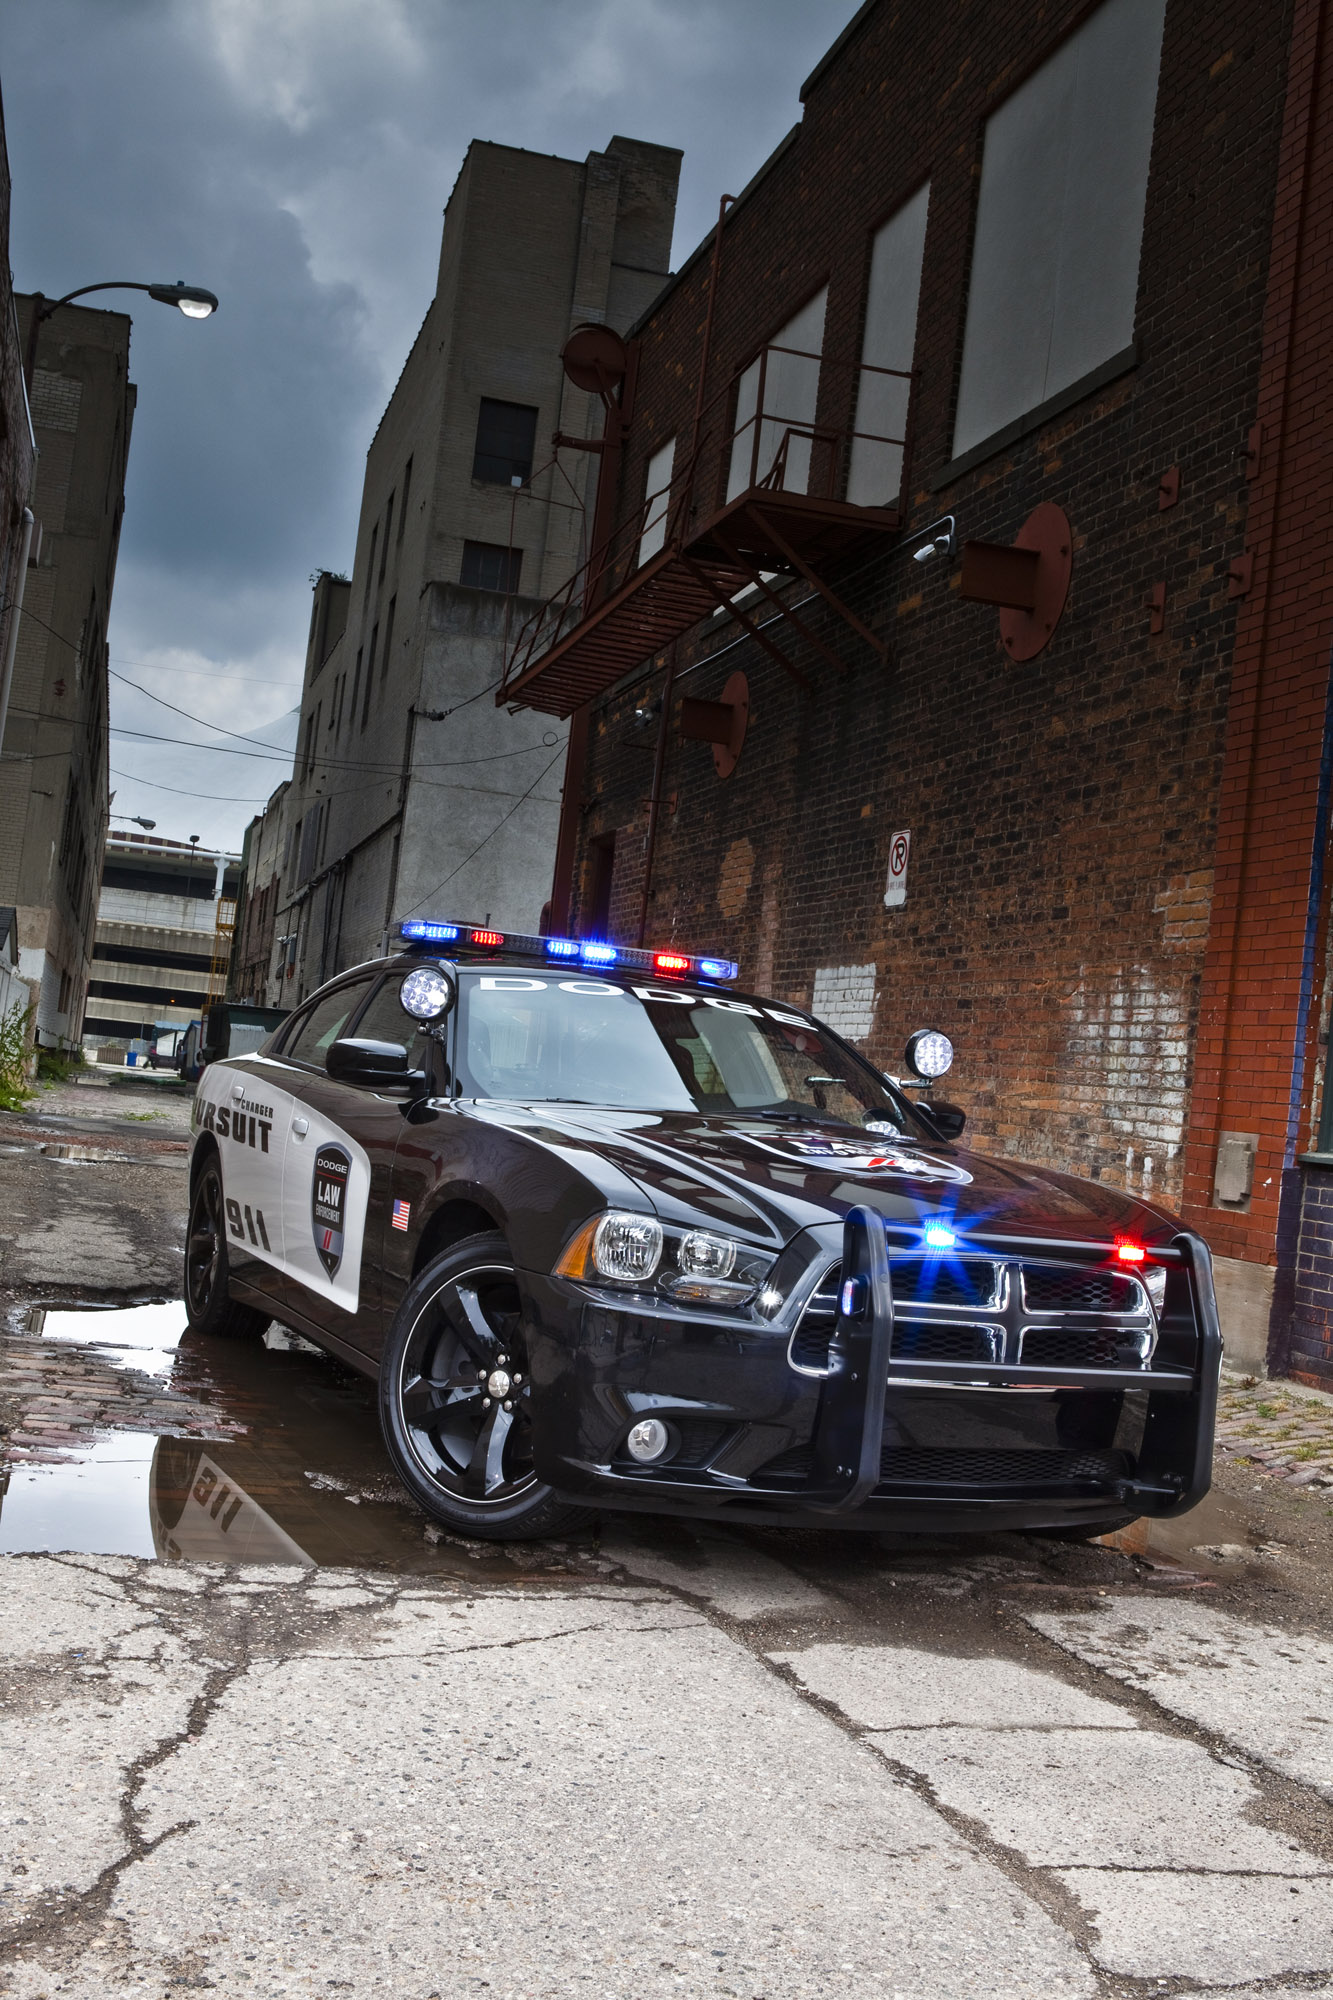 Police Car Wallpapers For Mobile Phones